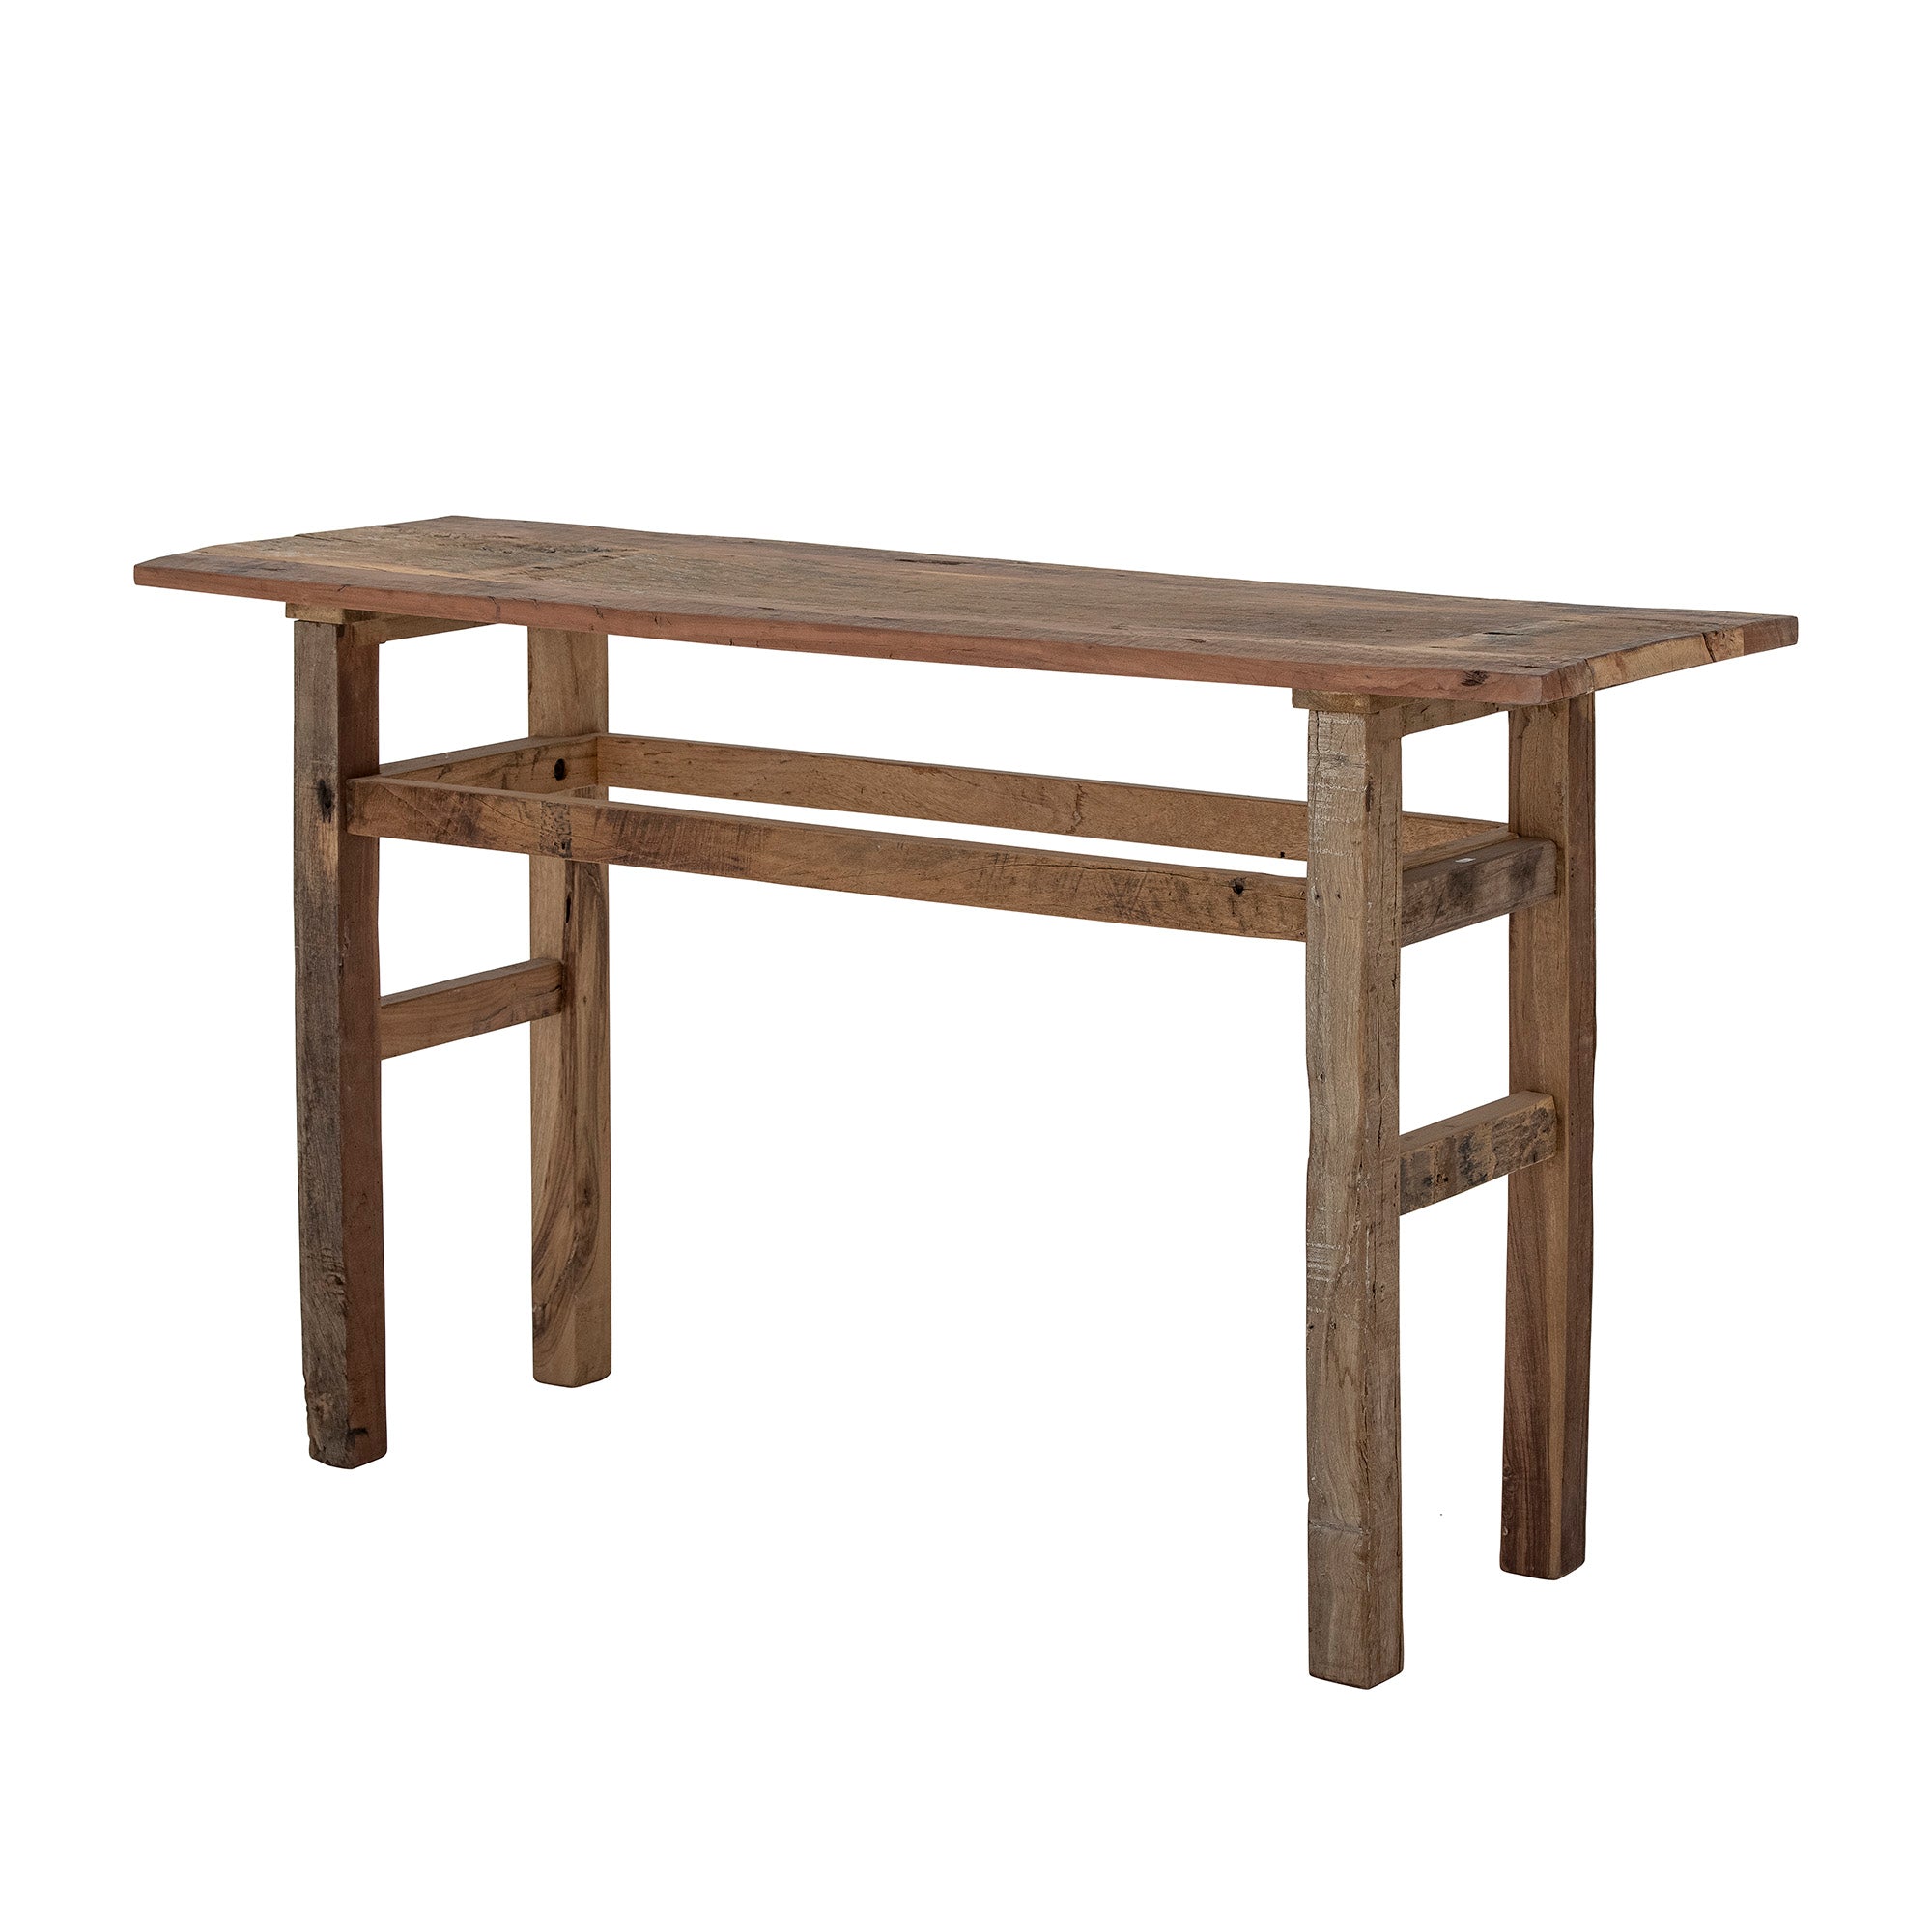 Large Rustic Country Console Table 70% off in our Black Friday sale!